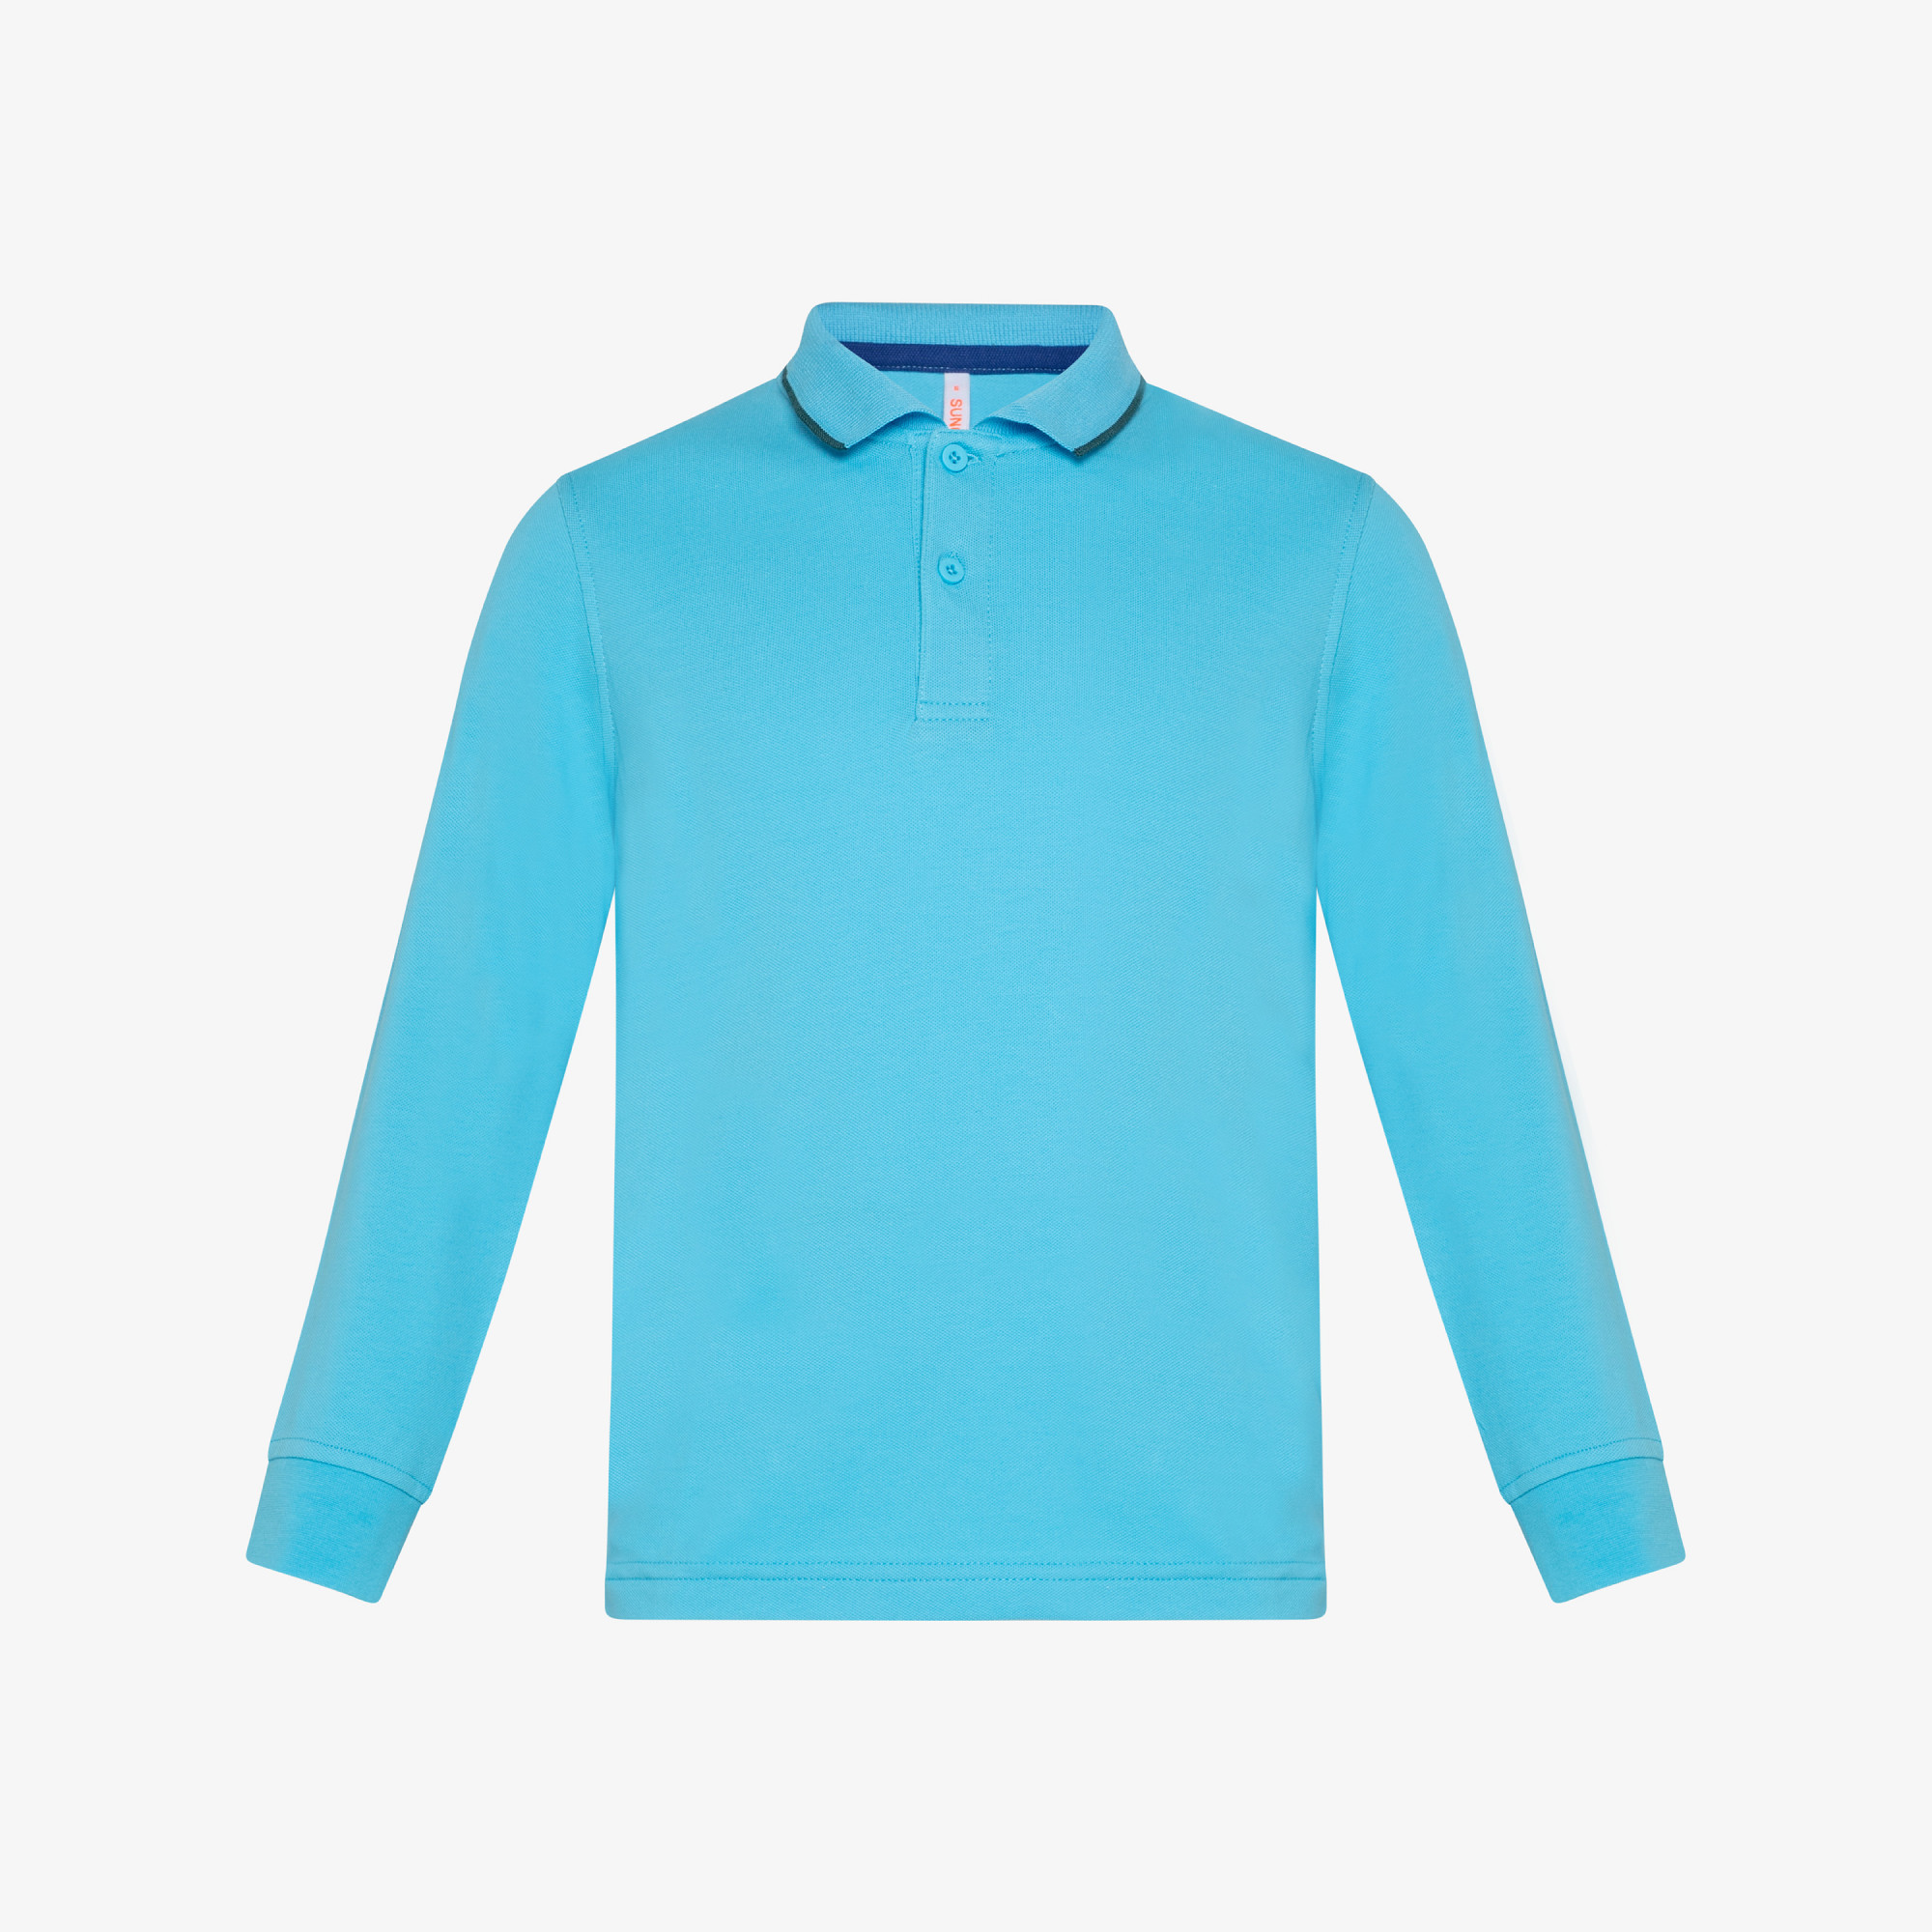 BOY'S POLO EL. SMALL STRIPES L/S TURQUOISE